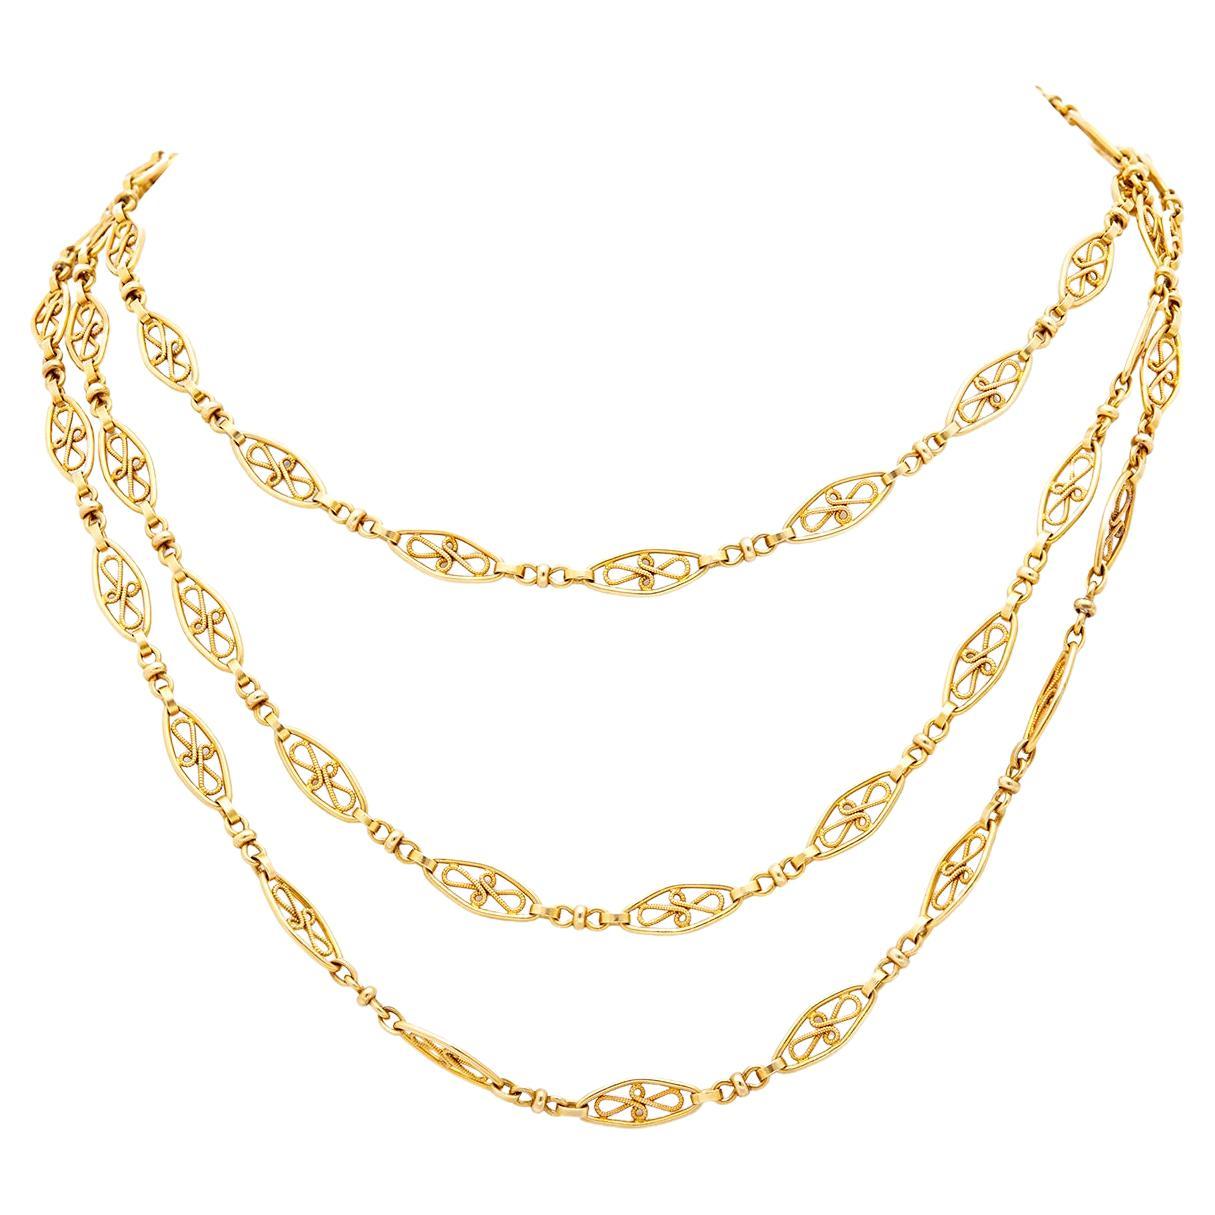 Belle Époque French 18k Yellow Gold Fancy Link Chain